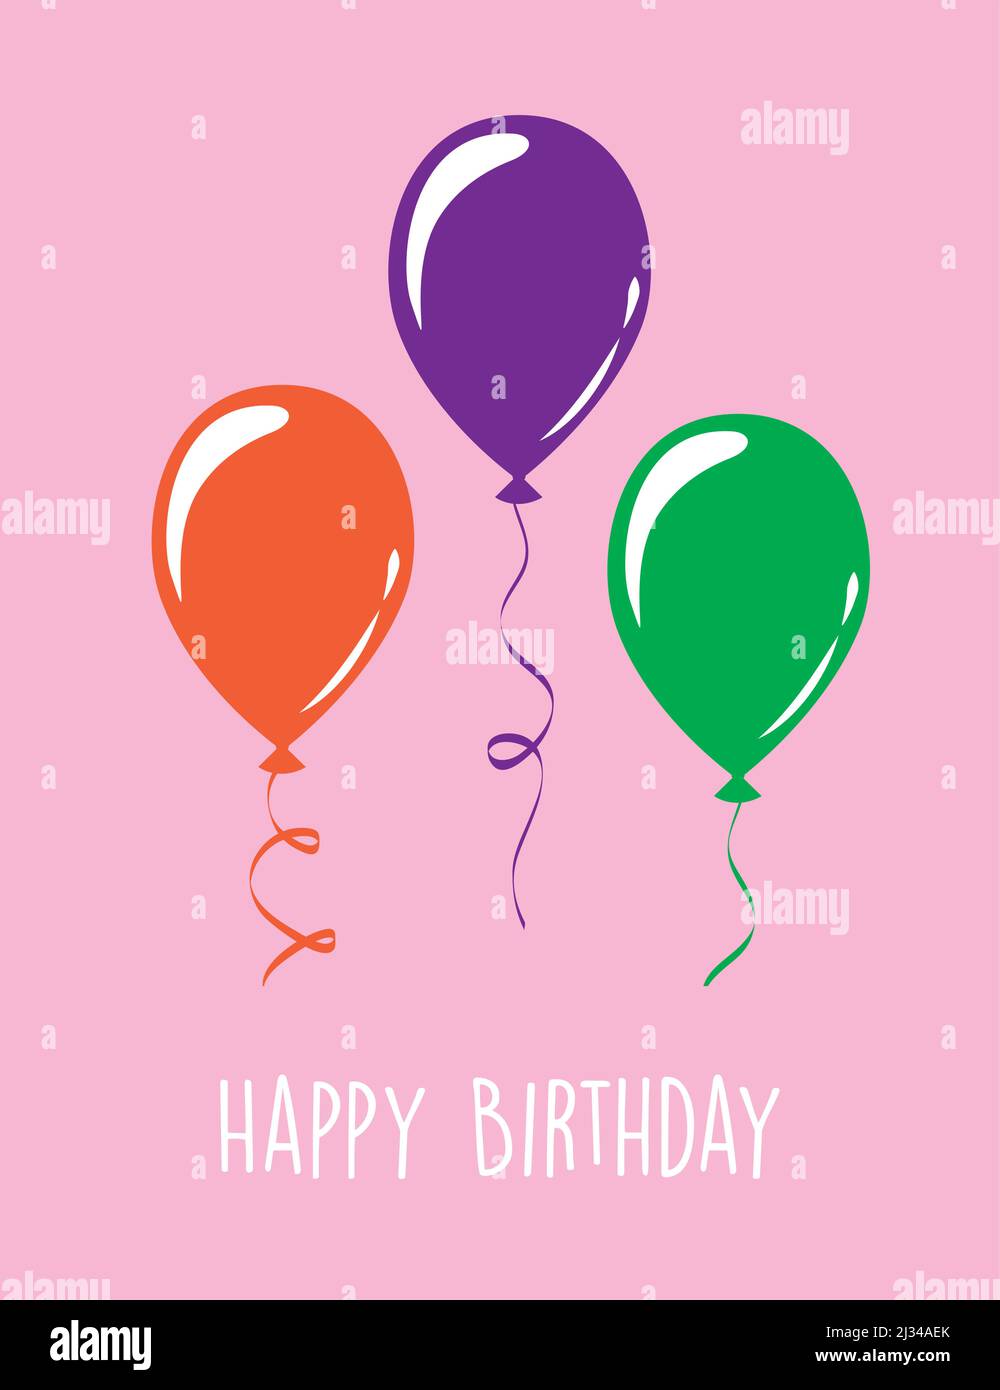 simple happy birthday greeting card with balloons Stock Vector ...